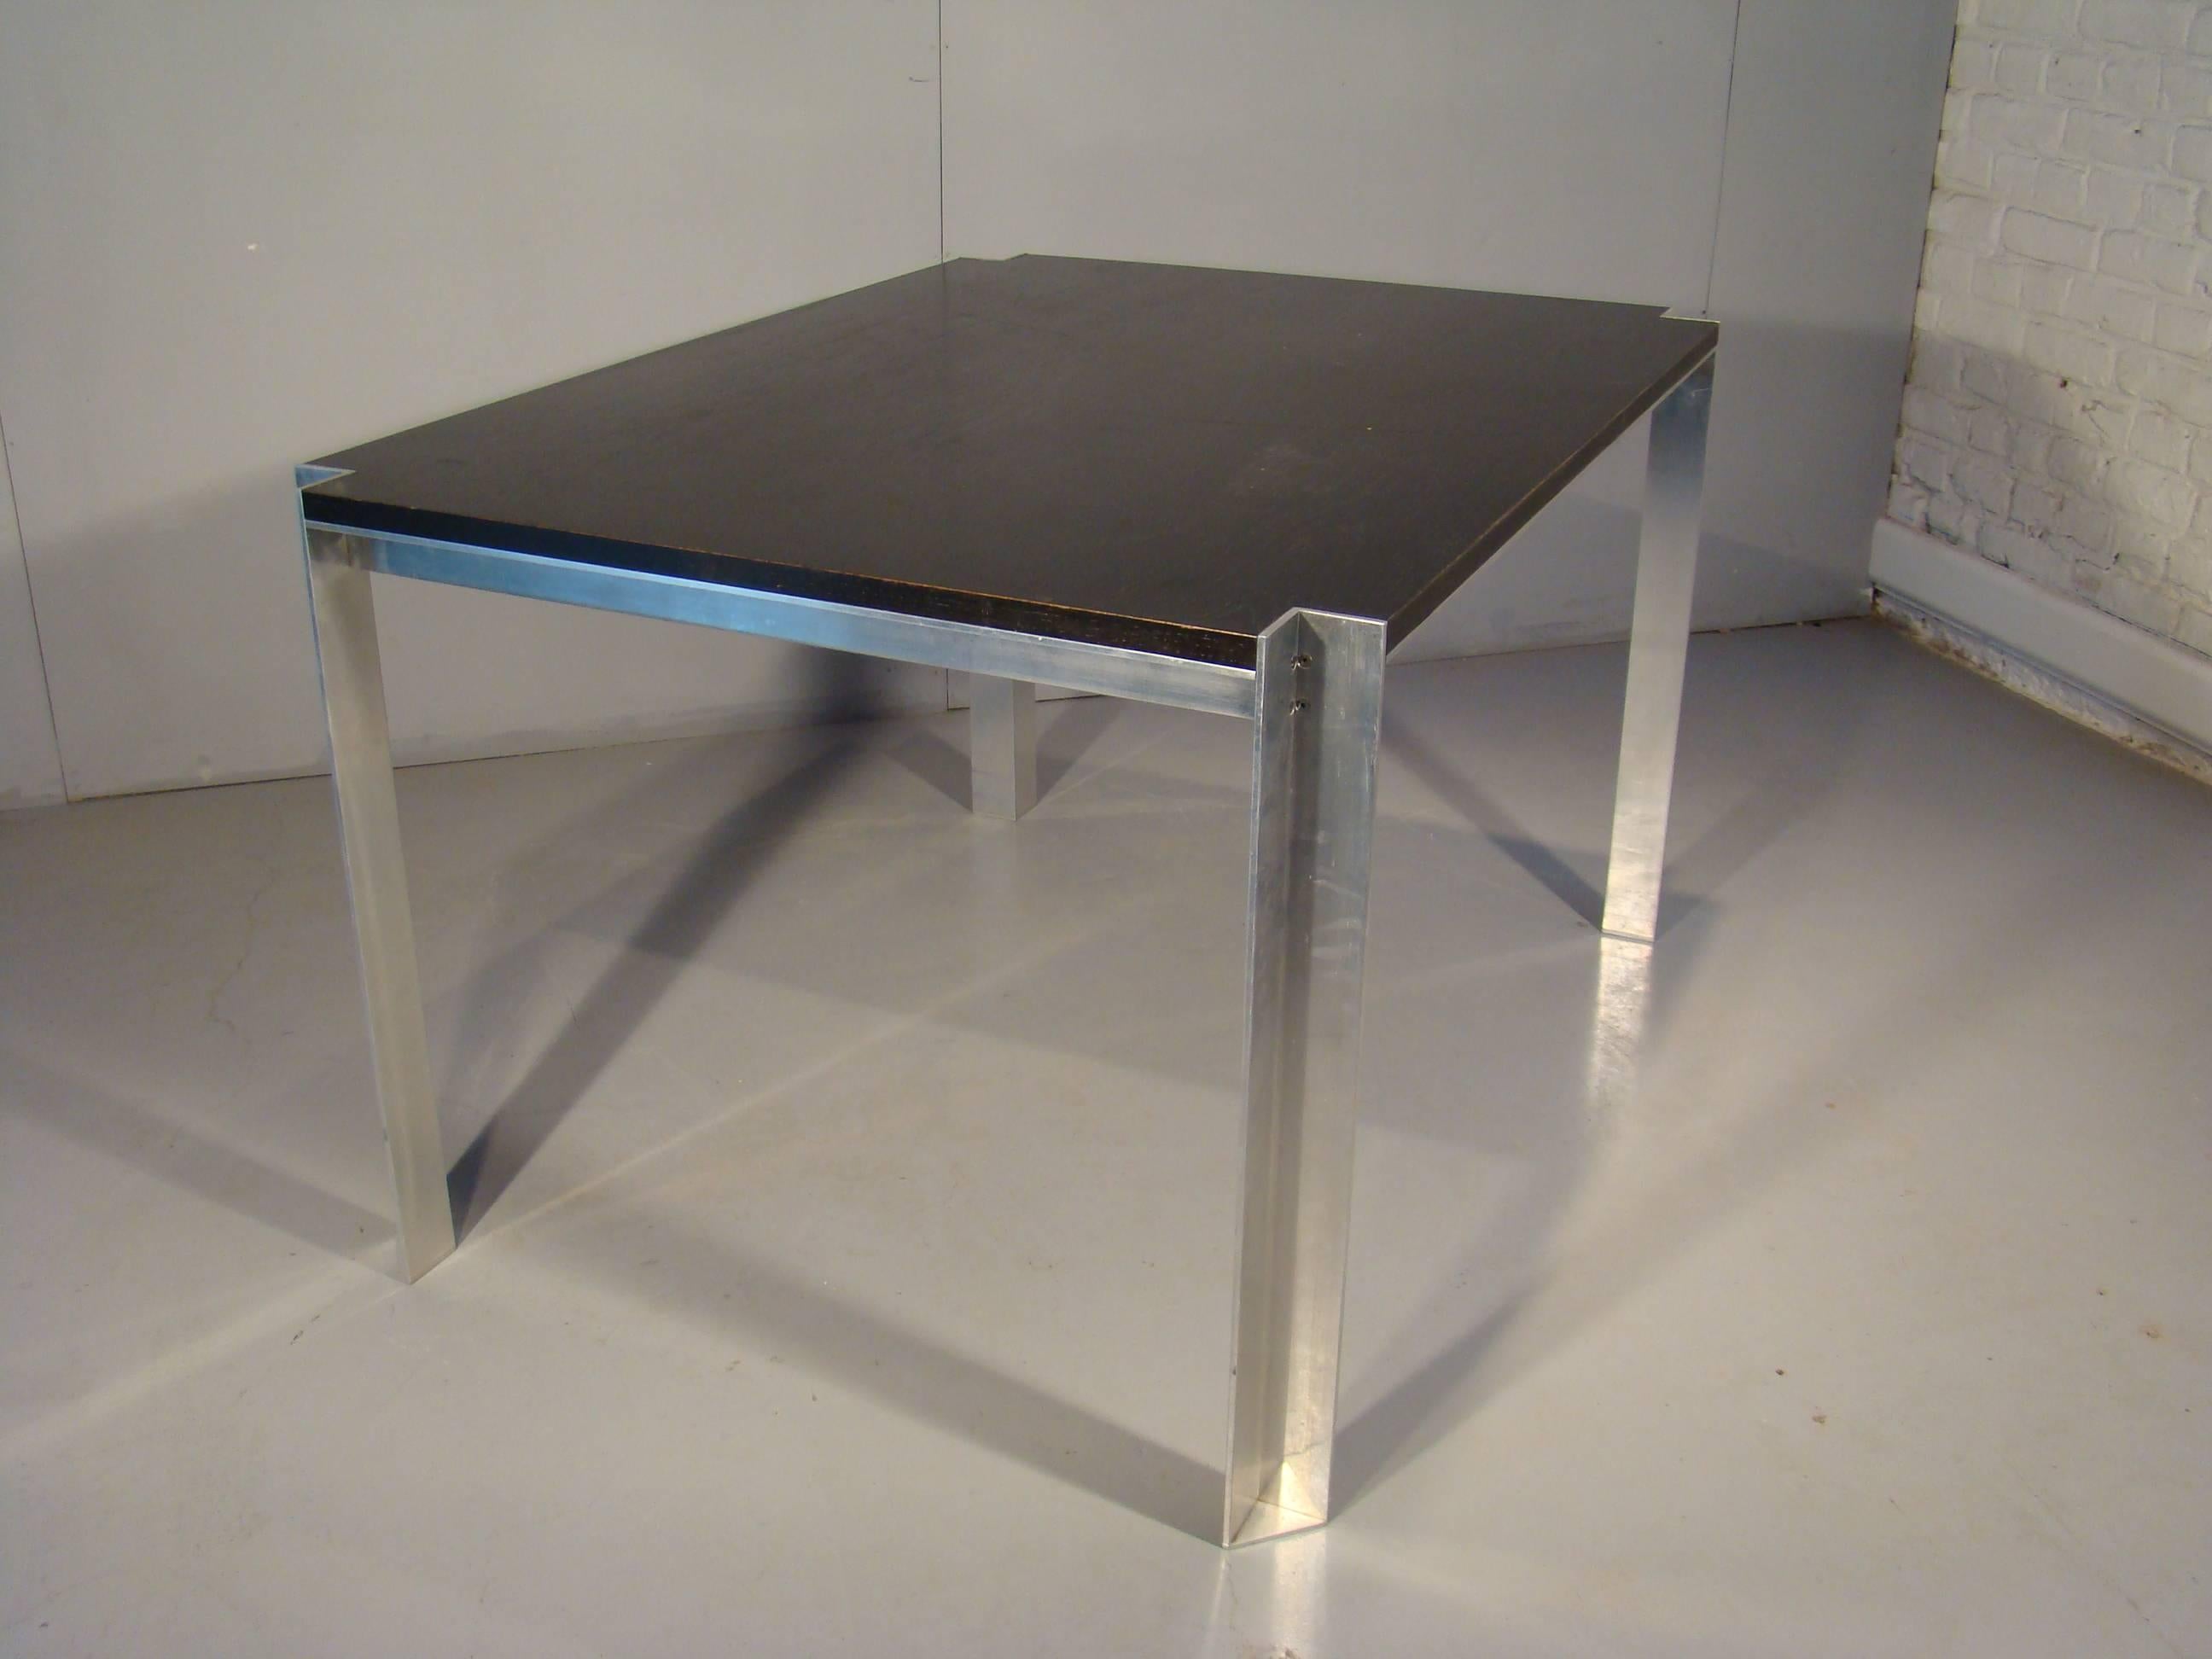 Georges Frydman, steel table with lacquered wood top. Edition E.F.A.